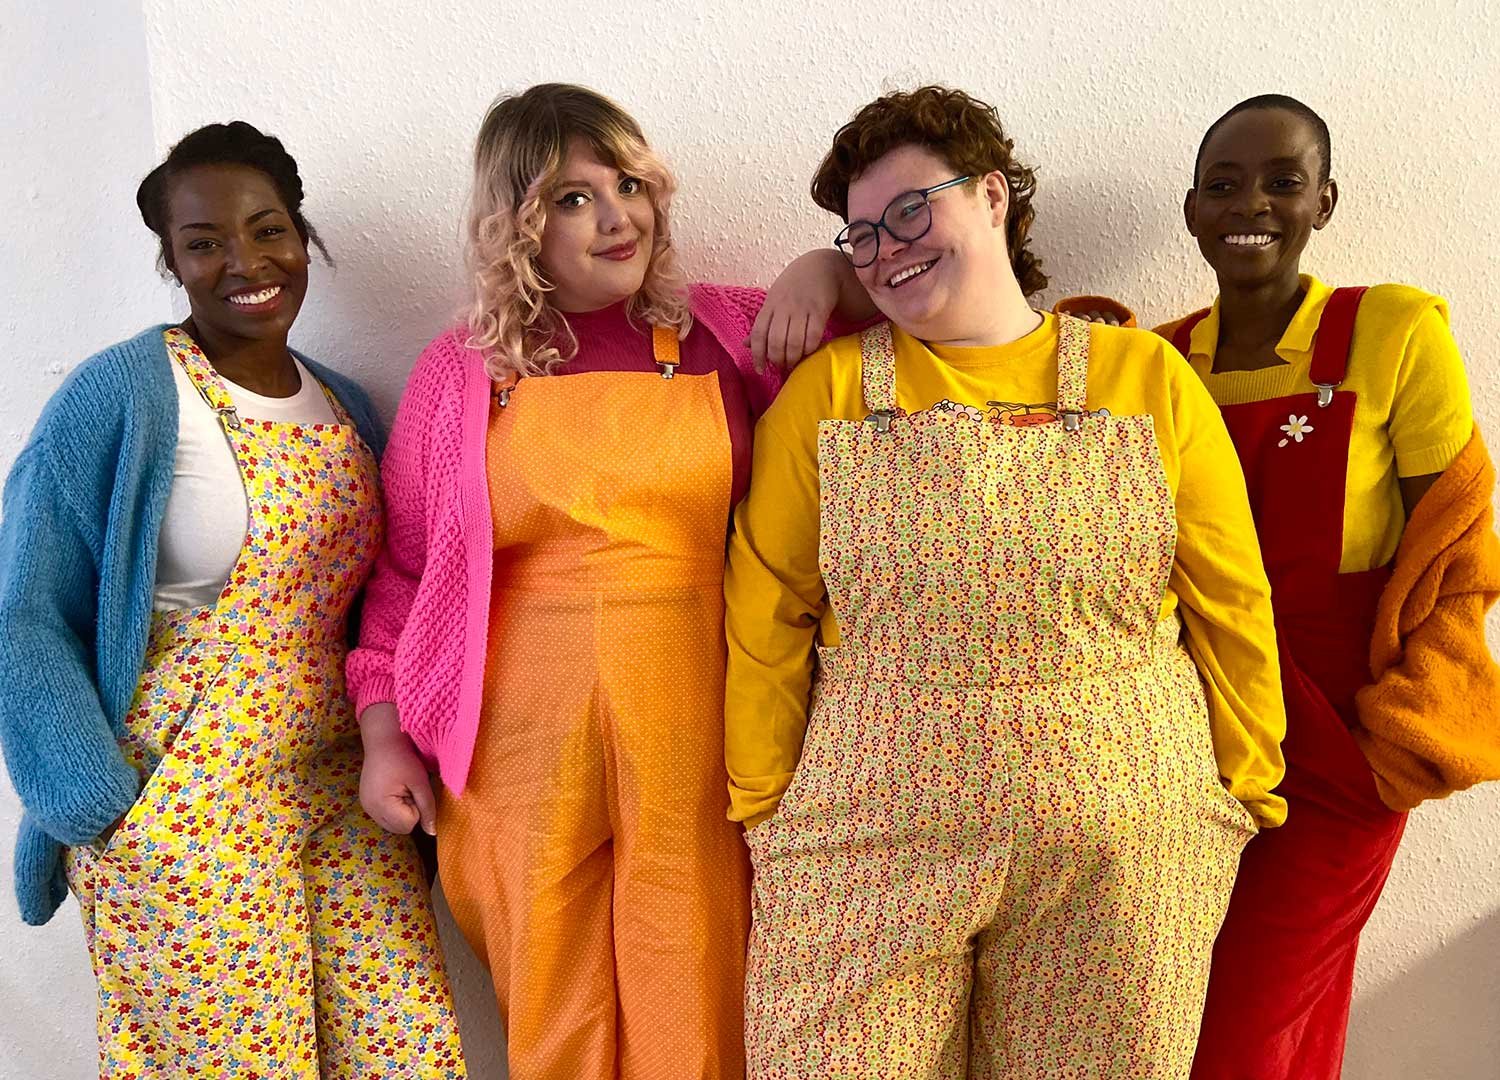 four models stand looking at the camera and smiling, wearing pairs of brightly coloured dungarees, tees and knits.